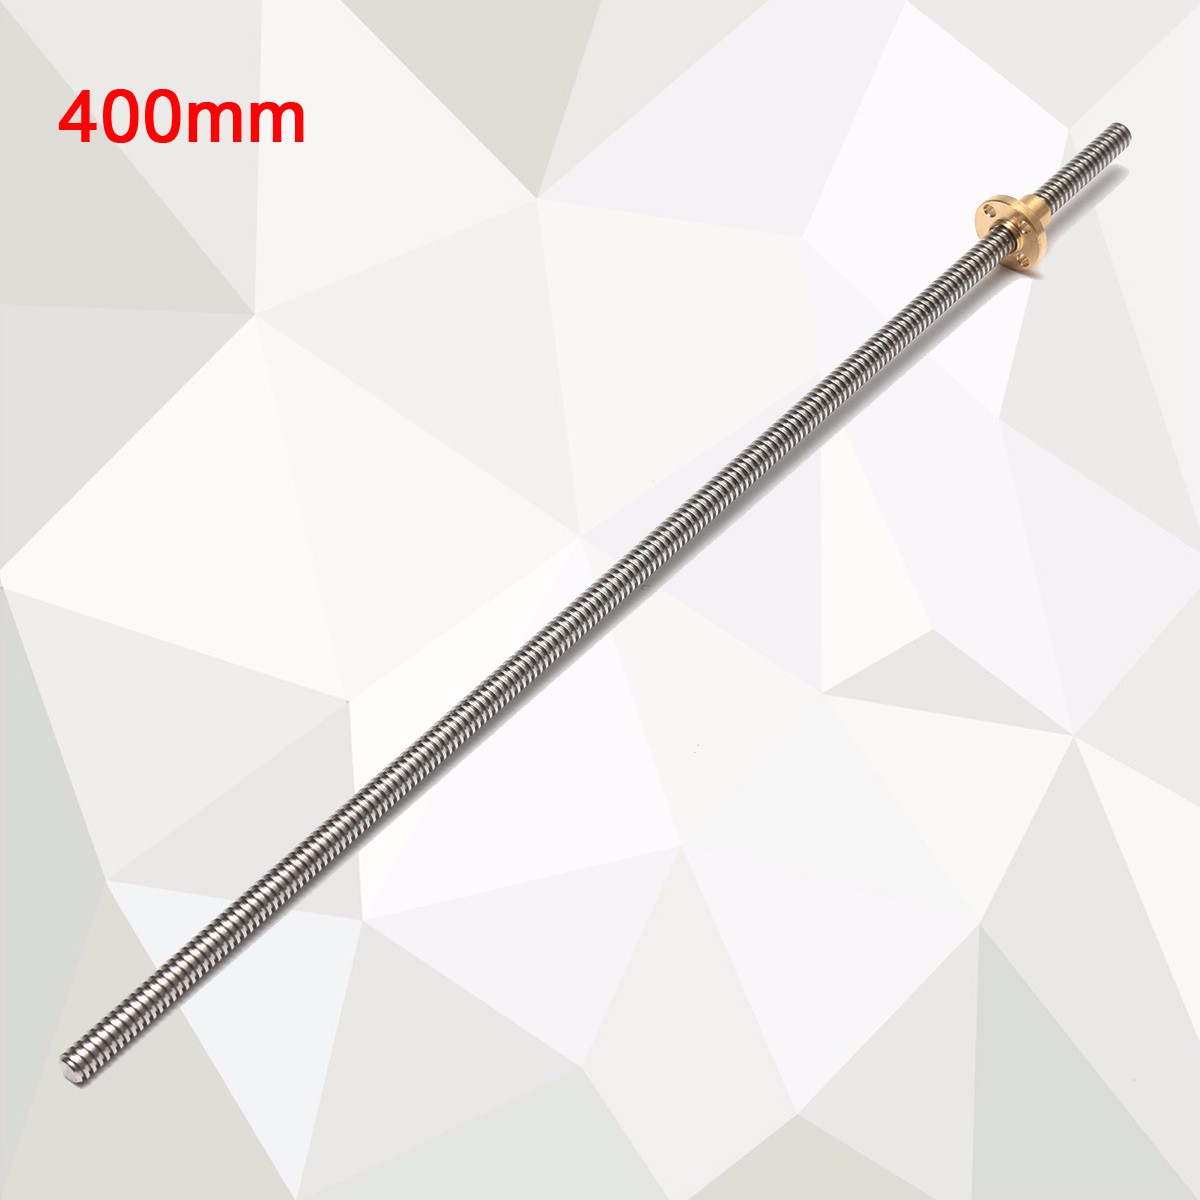 8mm 300/400/500/600mm Lead 2mm Stainless Steel Lead Screw + T8 Nut For CNC 3D Printer Reprap 12